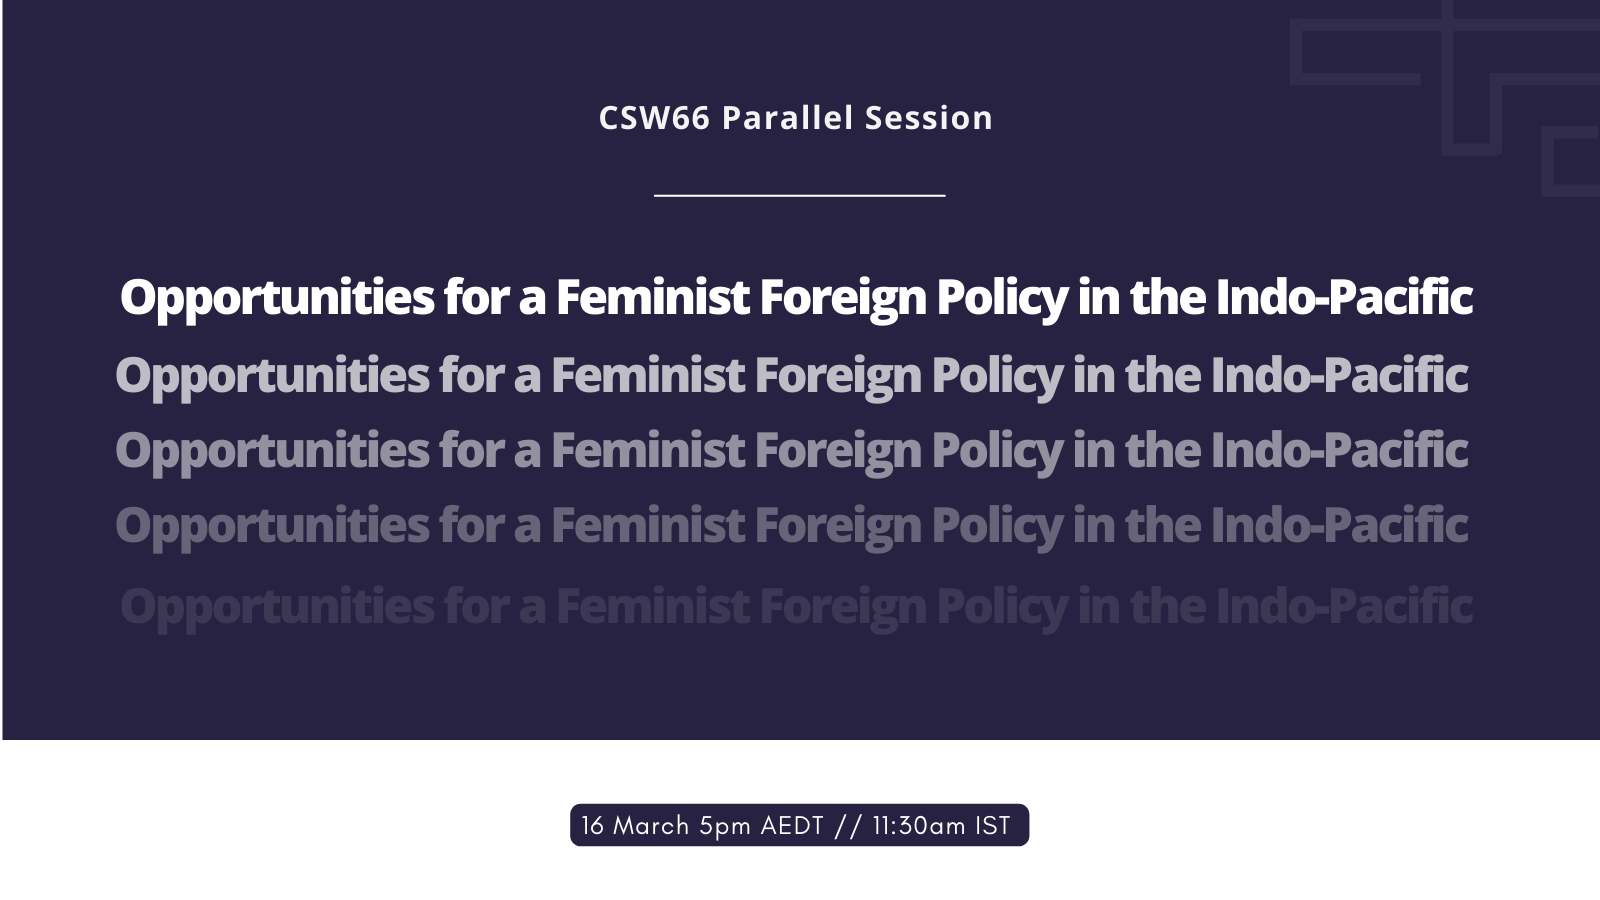 CSW66 Parallel Session. Opportunities for a Feminist Foreign Policy in the Indo-Pacific. 16 March 5pm AEDT//11.30am IST